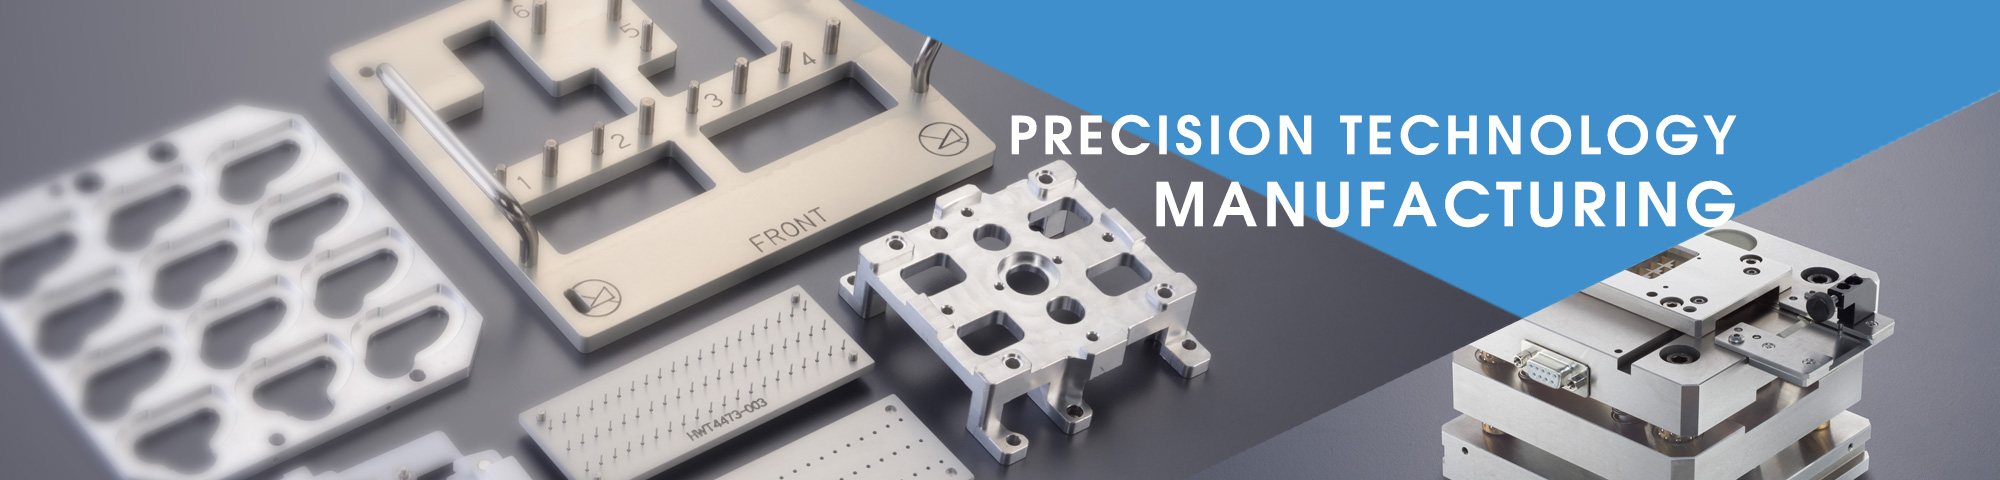 Precision Technology Manufacturing